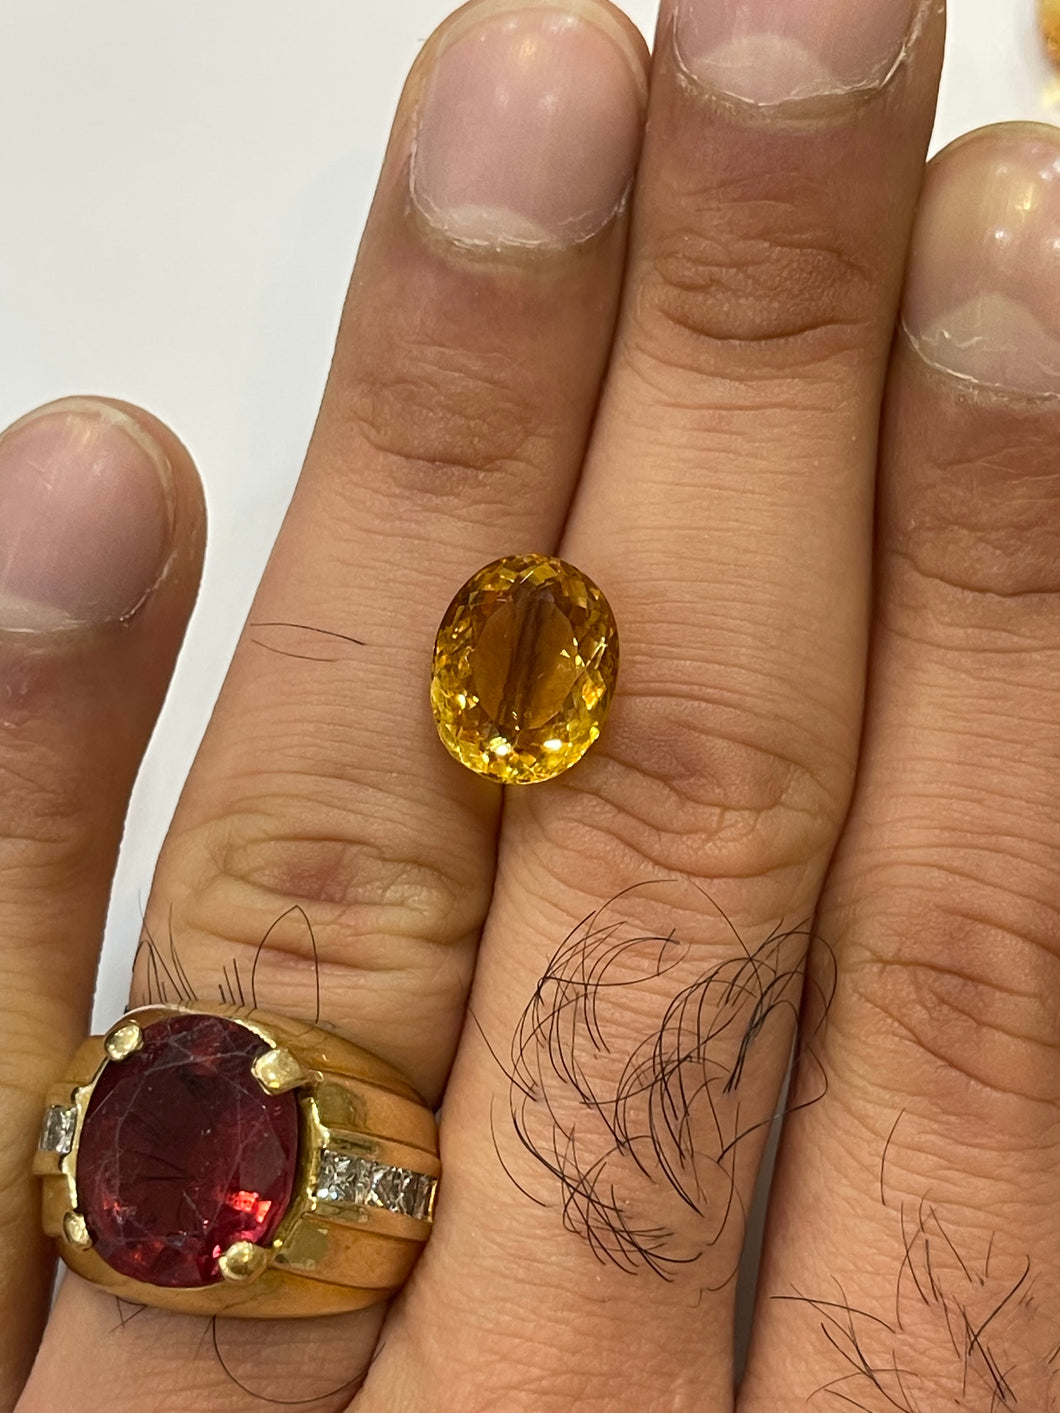 Imperial Citrine/Sunehla (Cut & Polished)